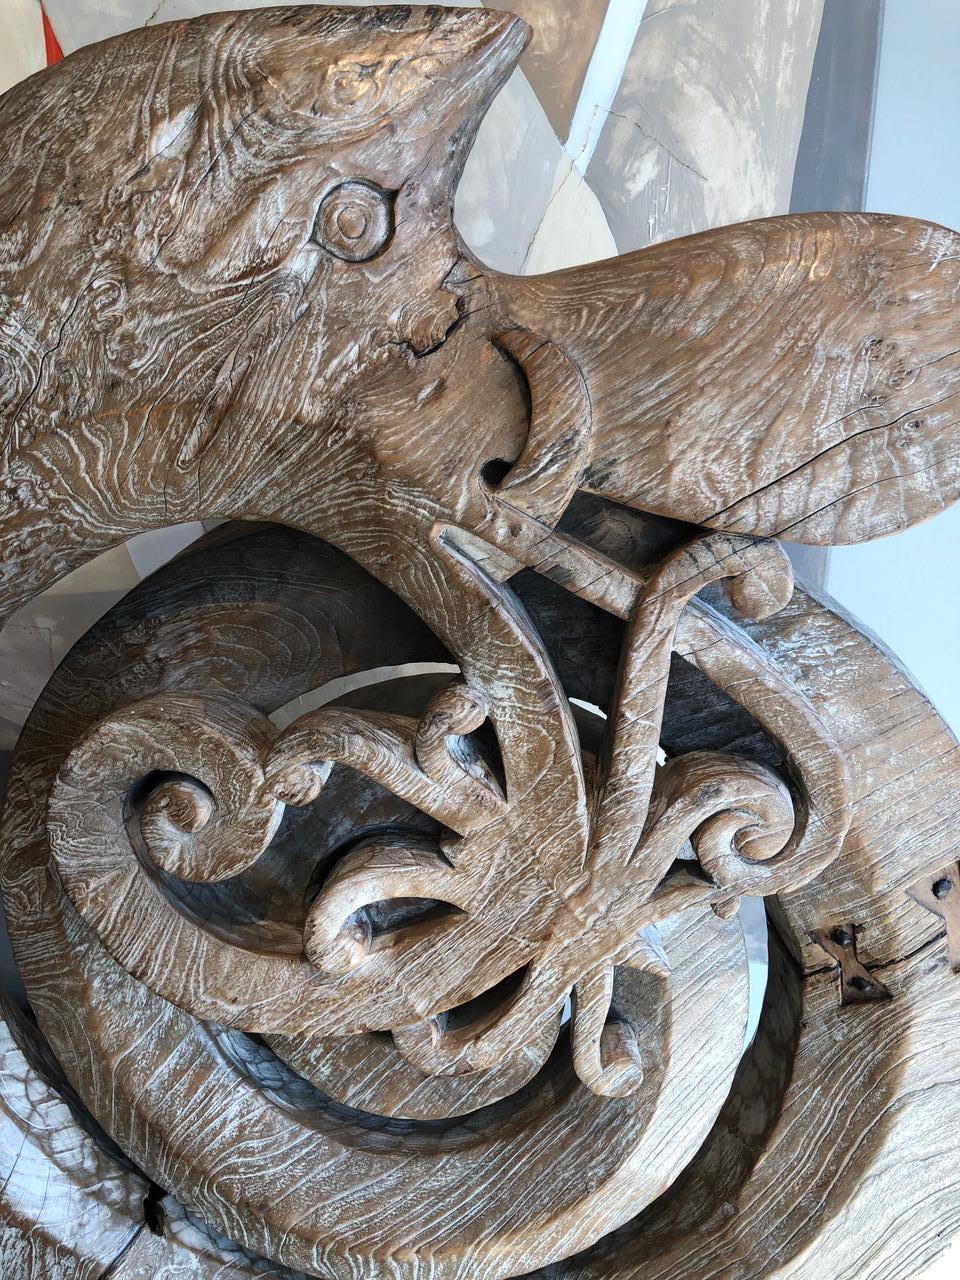 This impressive sculpture is incredibly smooth to the touch due to the teak root, which had a long life underground, where the constant movement of water gave it this fluid feel. The spiral detail of this sculpture is typically from Borneo and the